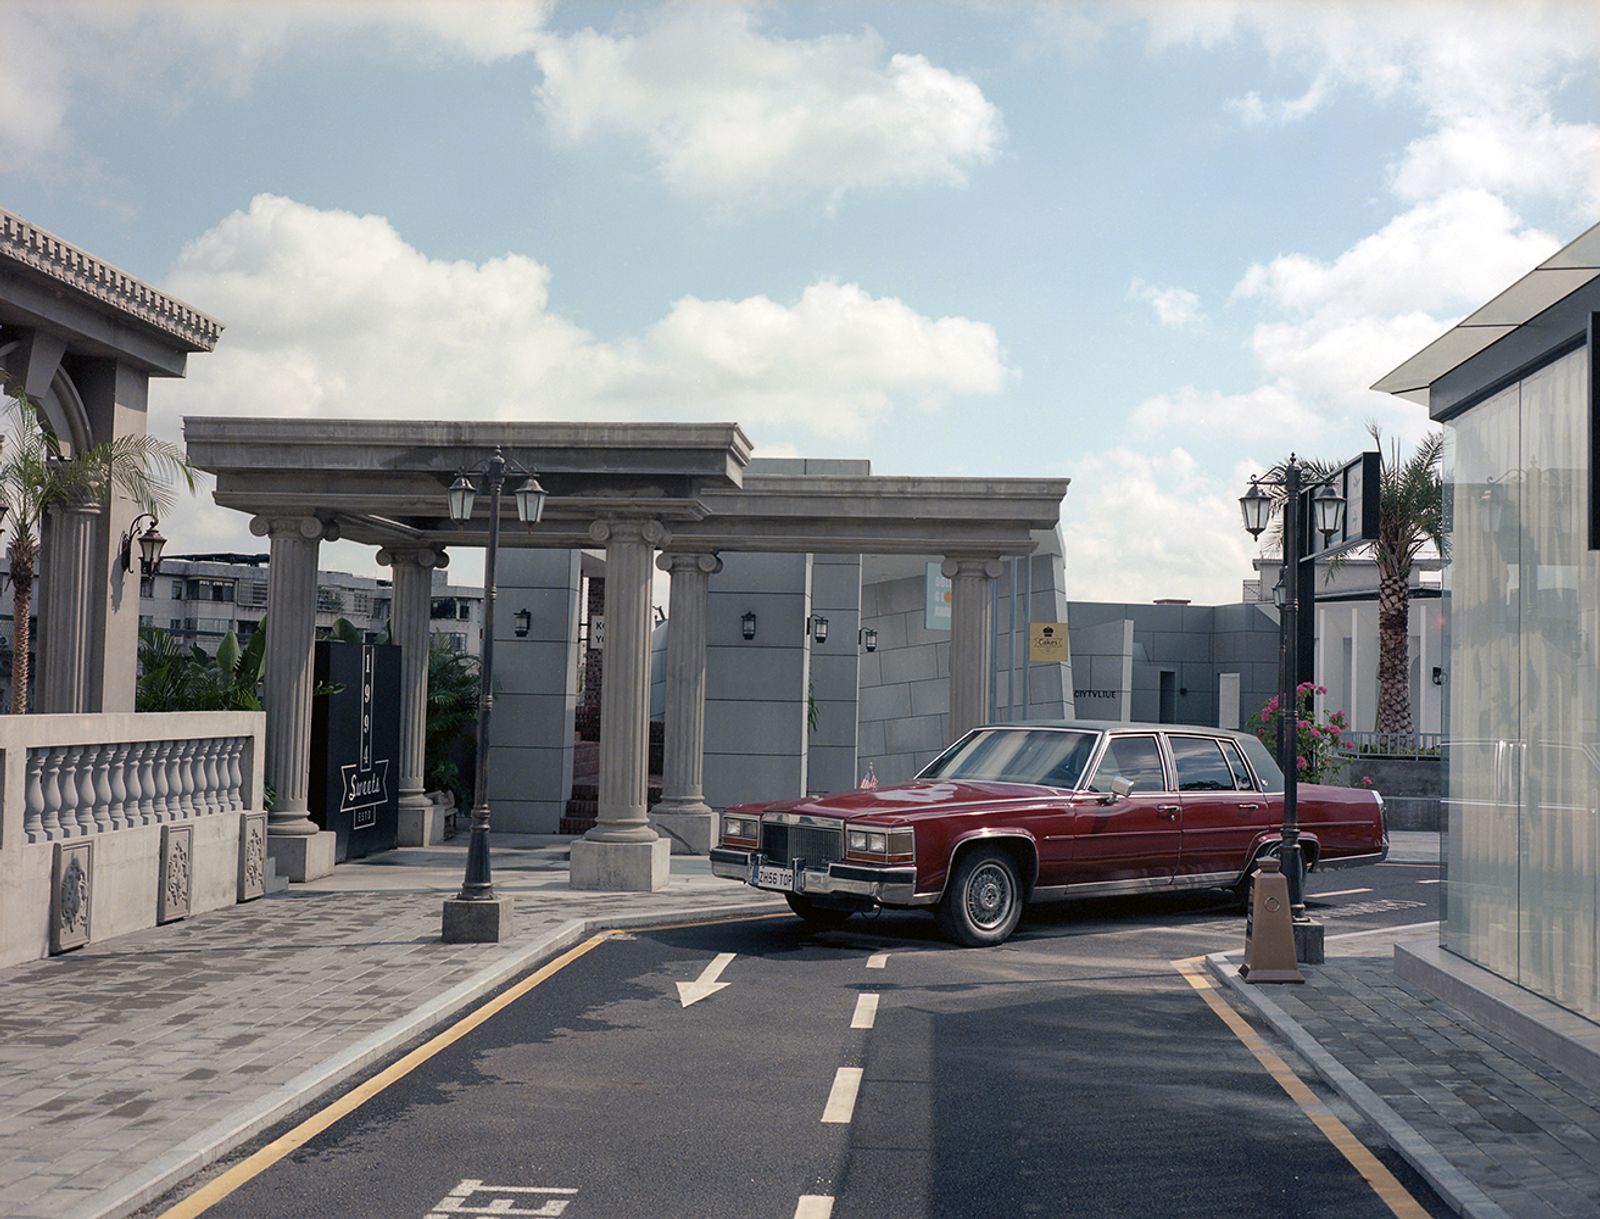 © Ge Zeng - Western colonnade with vintage car